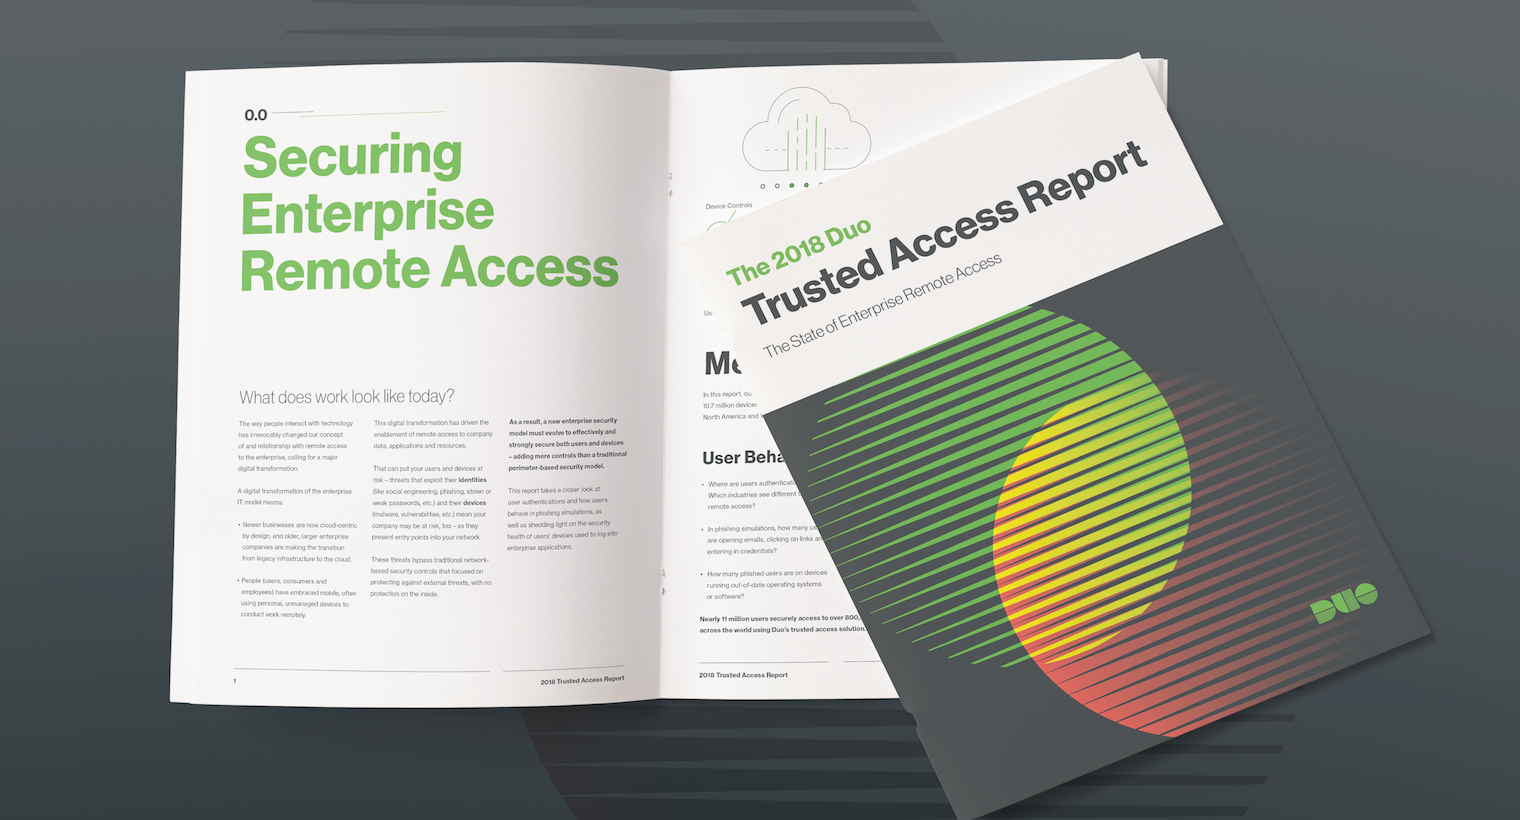 Duo Security releases a new report about trusted access